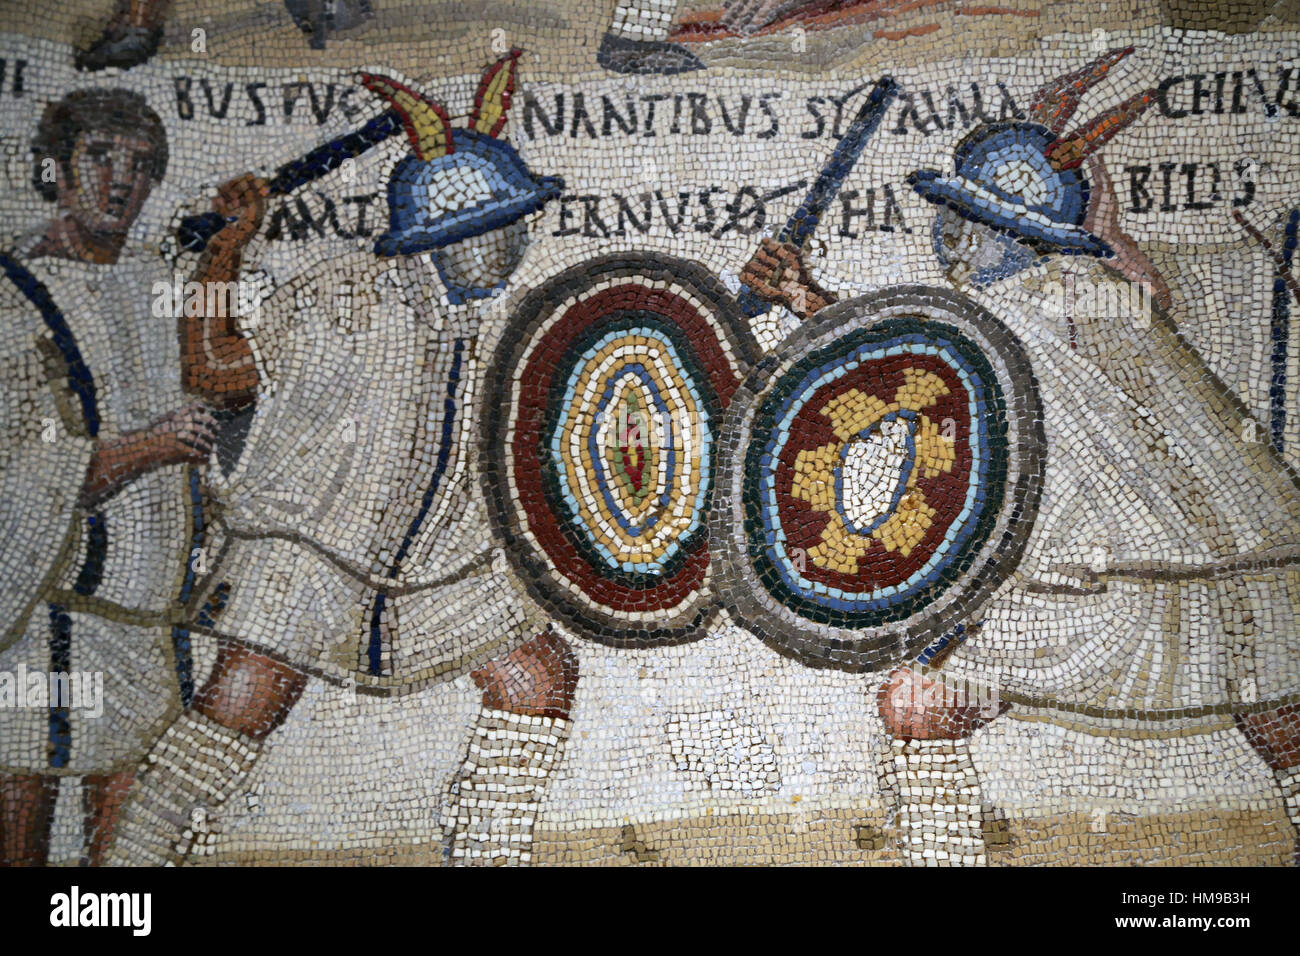 gladiator fight. Mosaic. 3rd century. Rome. Two Eques flanked by two lanistae. National Archaeological Museum, Madrid. Spain. Stock Photo